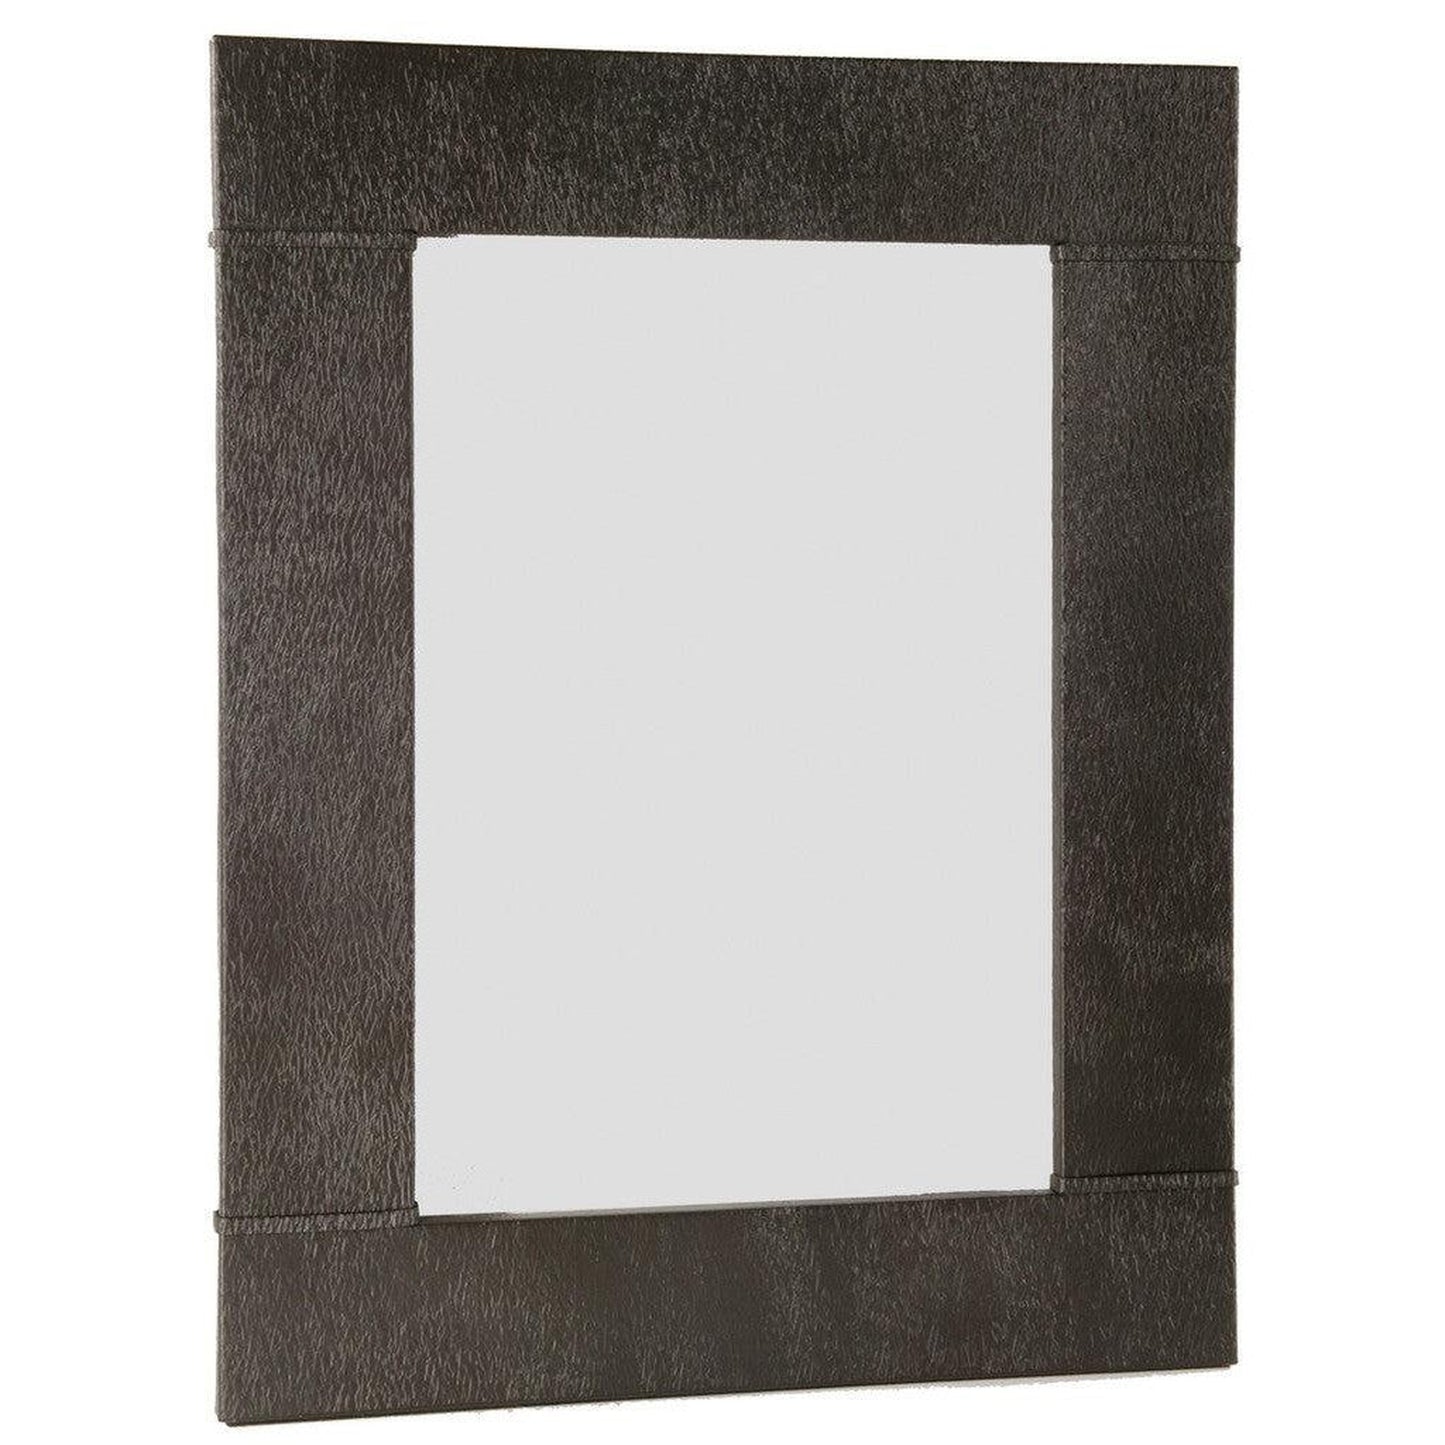 Stone County Ironworks Cedarvale 31" x 35" Small Hand Rubbed Pewter Iron Wall Mirror With Copper Iron Accent